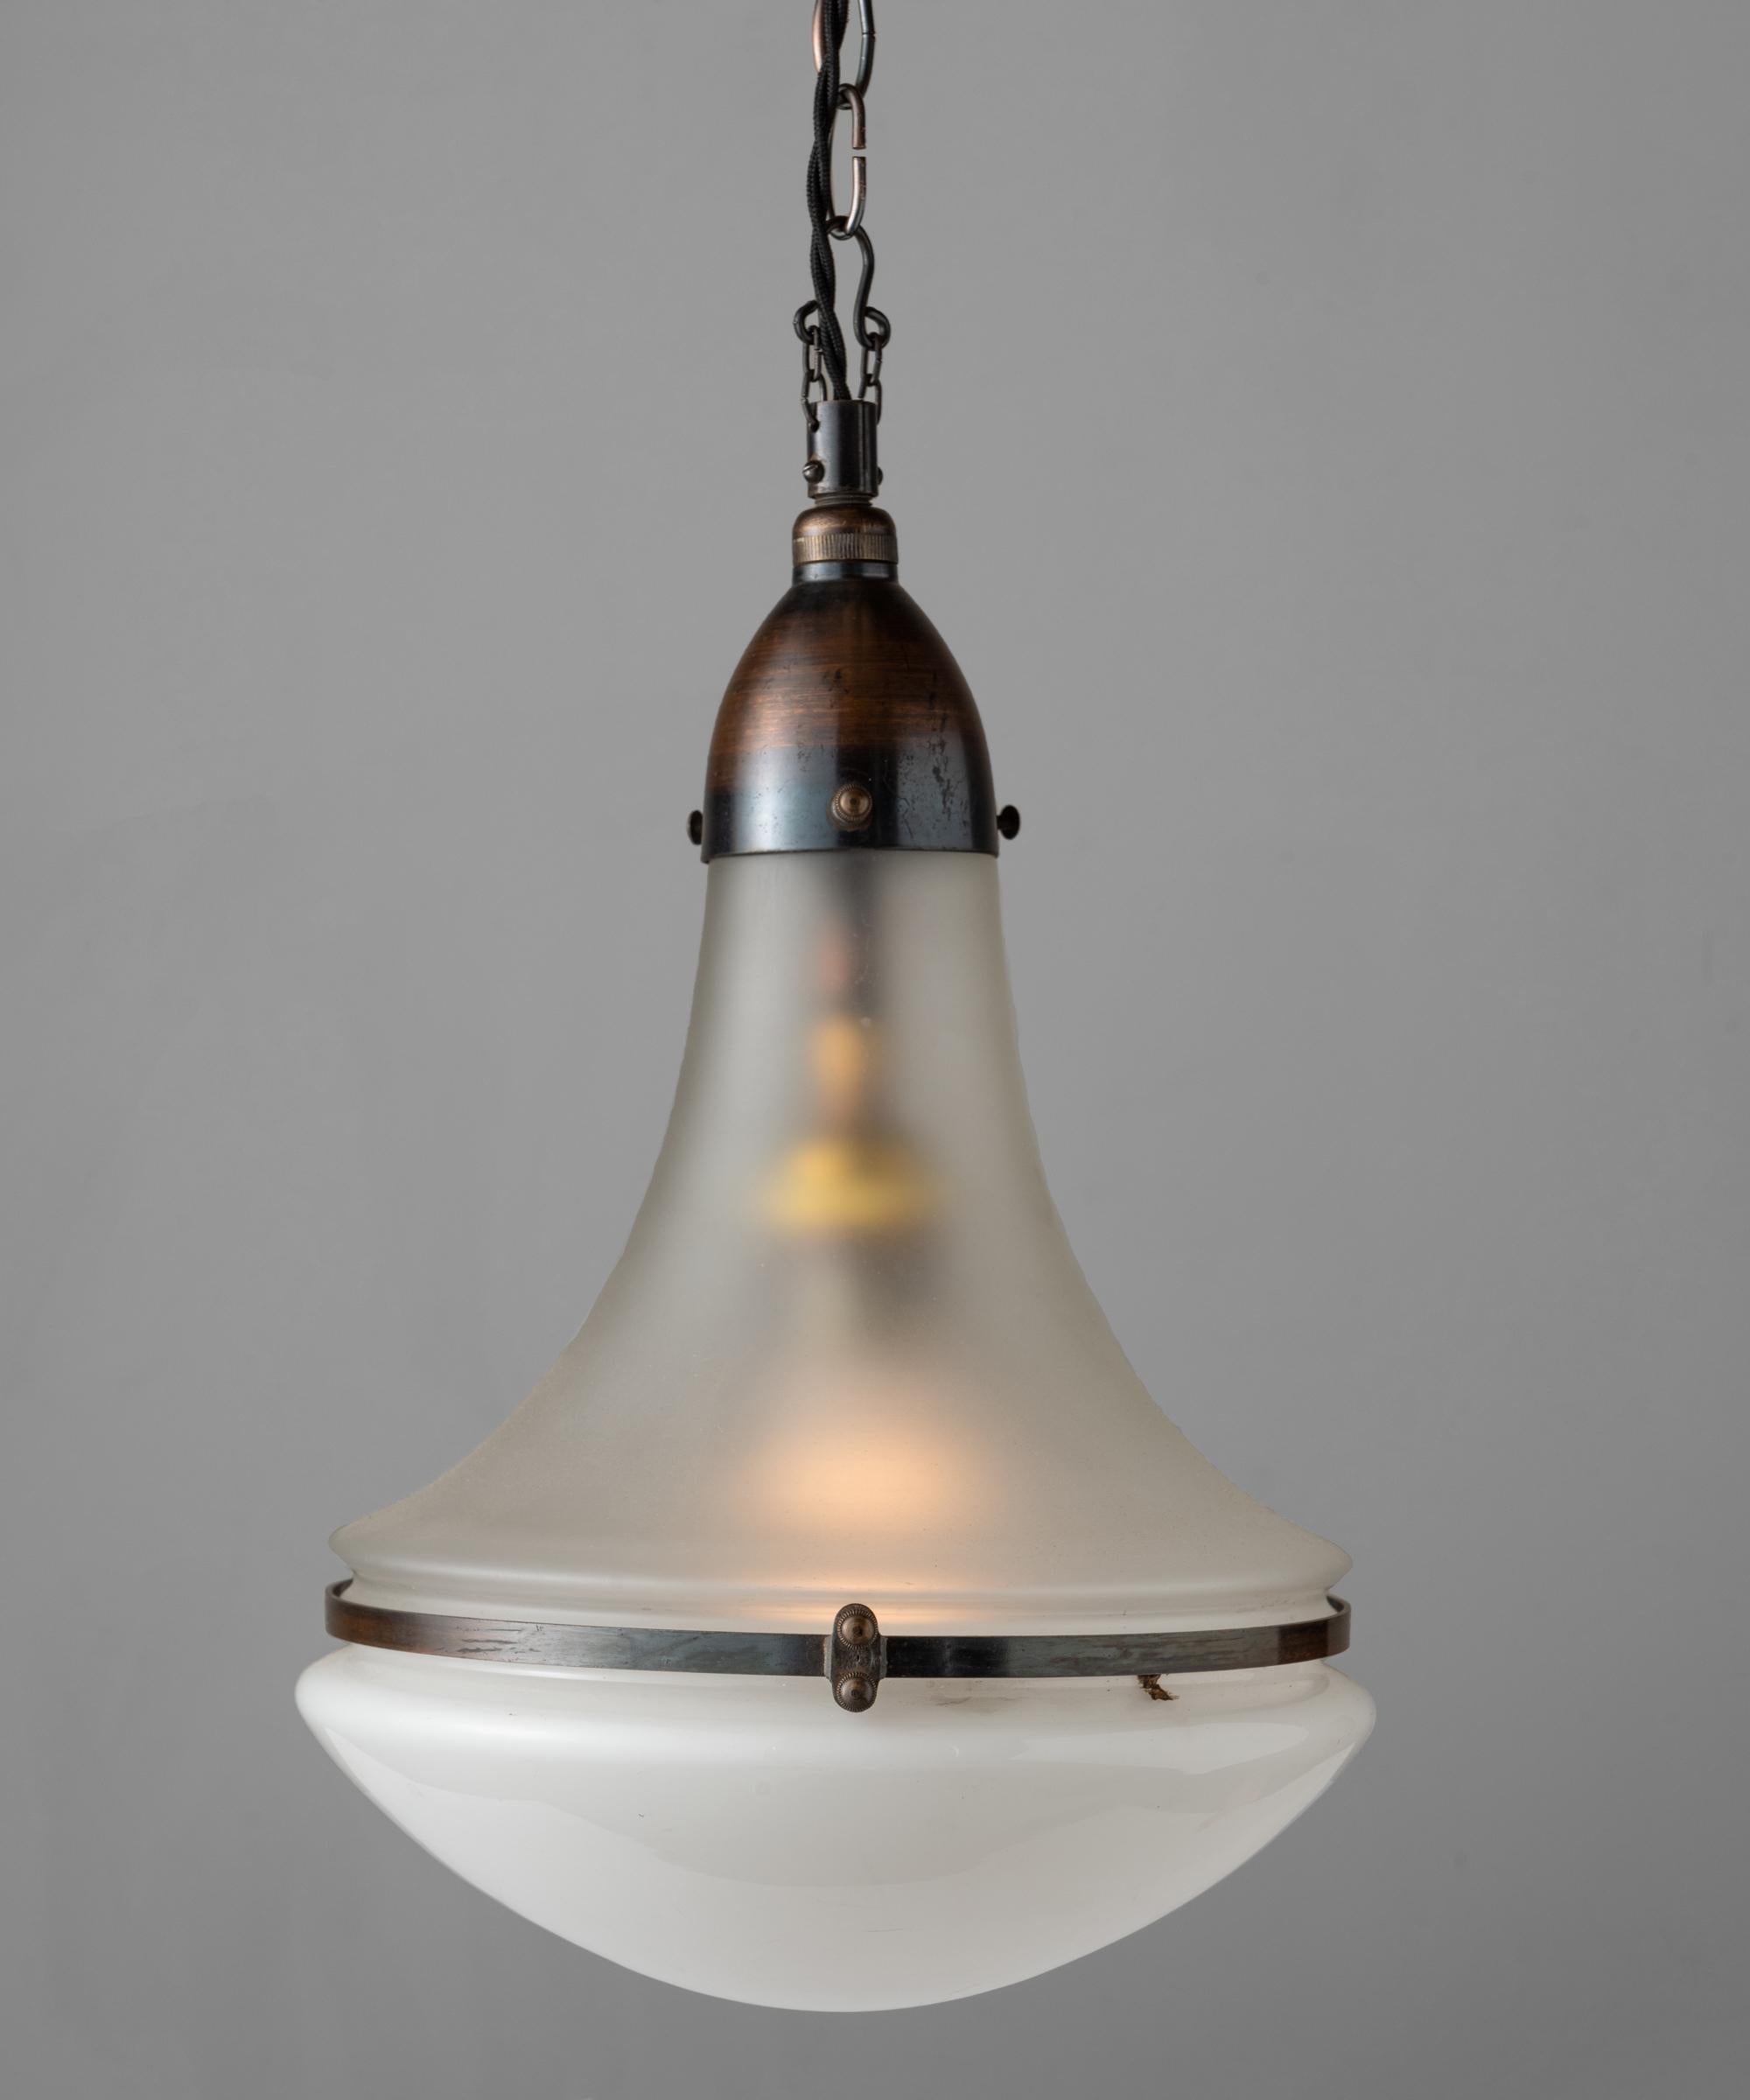 Luzette pendant by Peter Behrens, Germany circa 1930.

With frosted glass top and opaline glass bottom, secured with copper fitter and brace. Manufactured by AEG Siemens with manufacturer's mark.

Measures: 9